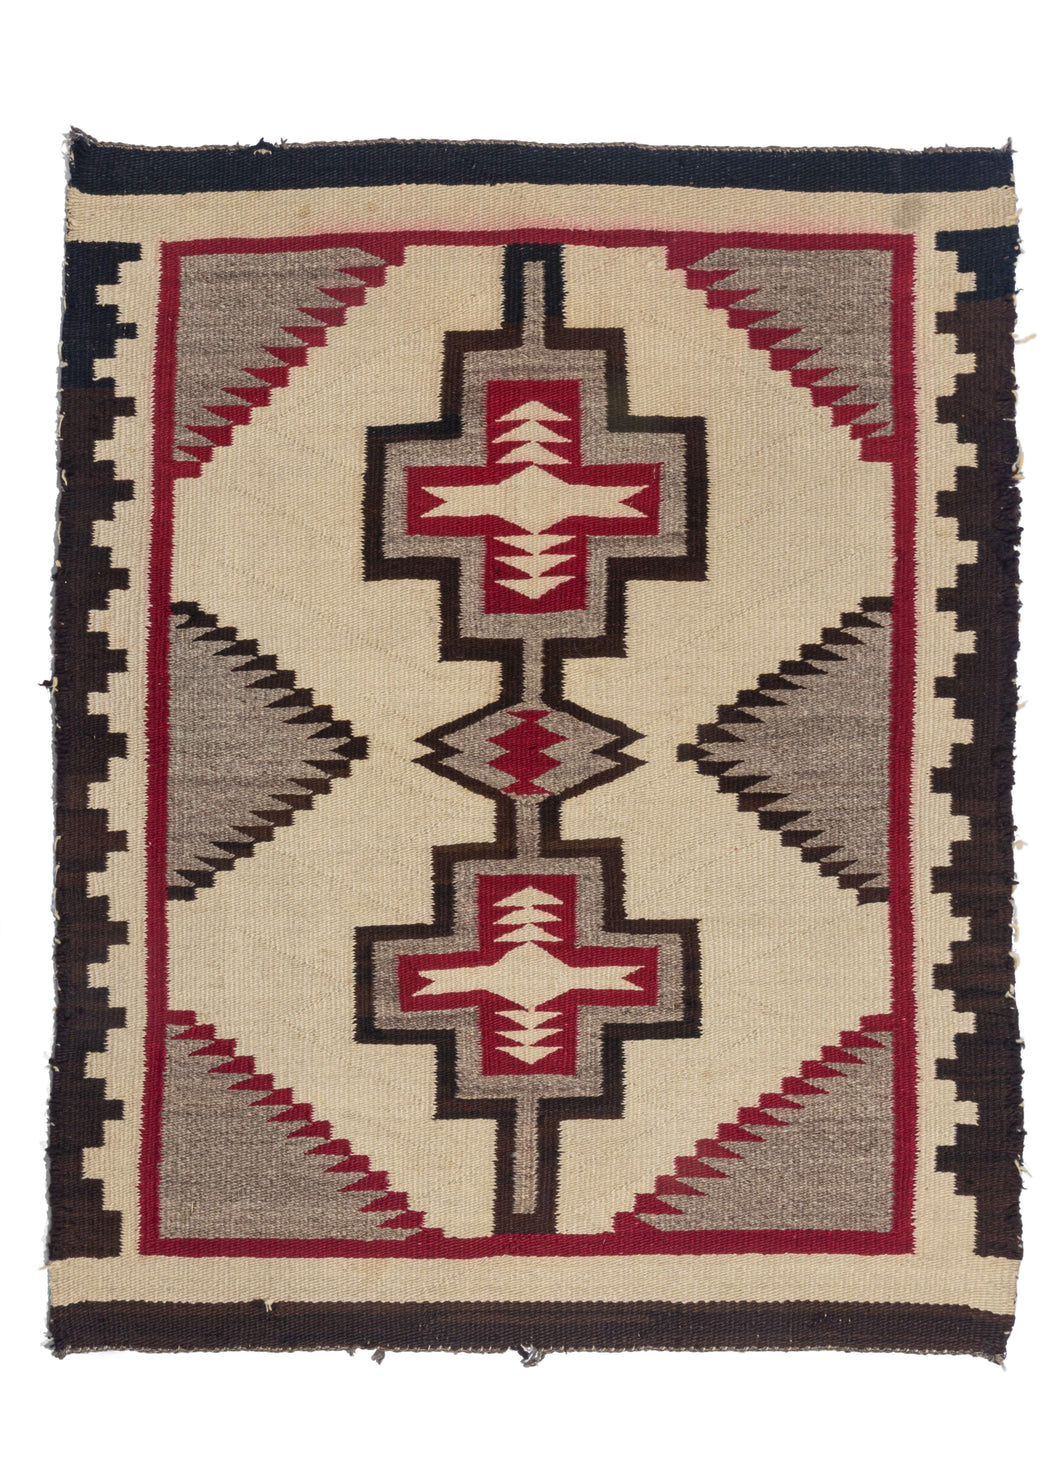 Antique Navajo Scatter rug with bold double diamond design in black, red and undyed wool